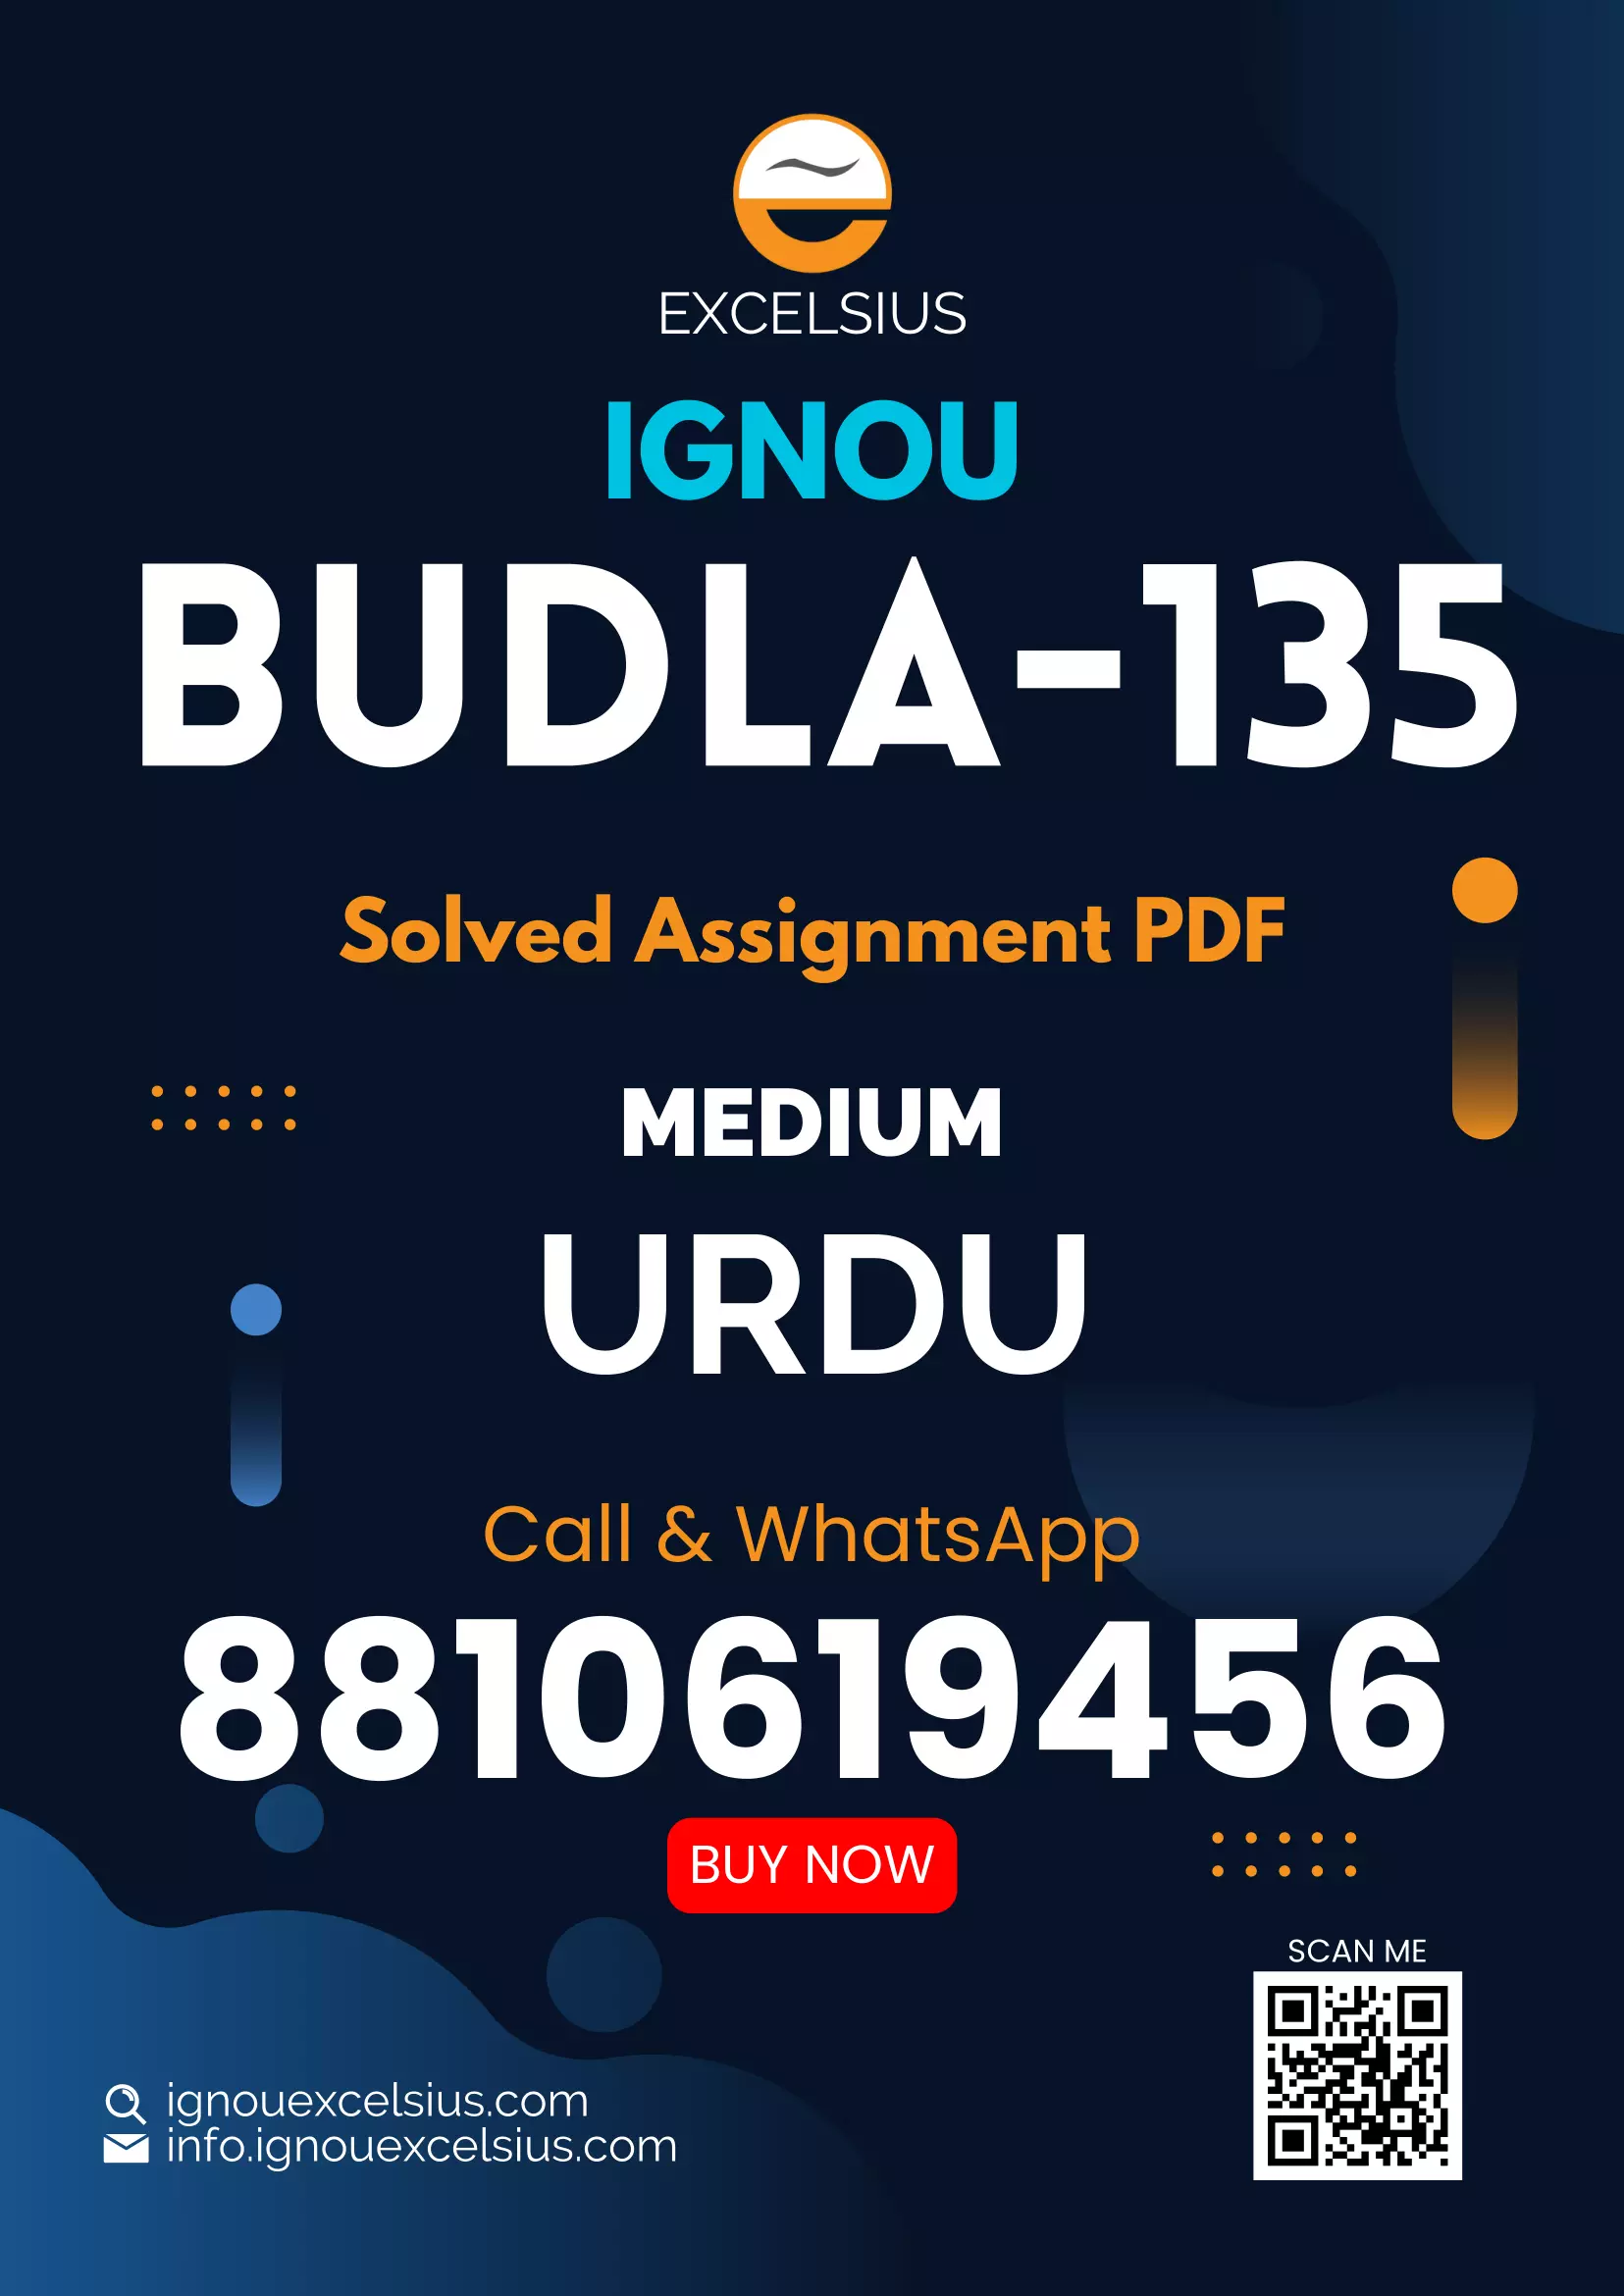 IGNOU BUDLA-135 - Study of Modern Urdu Prose & Poetry, Latest Solved Assignment-July 2023 - January 2024